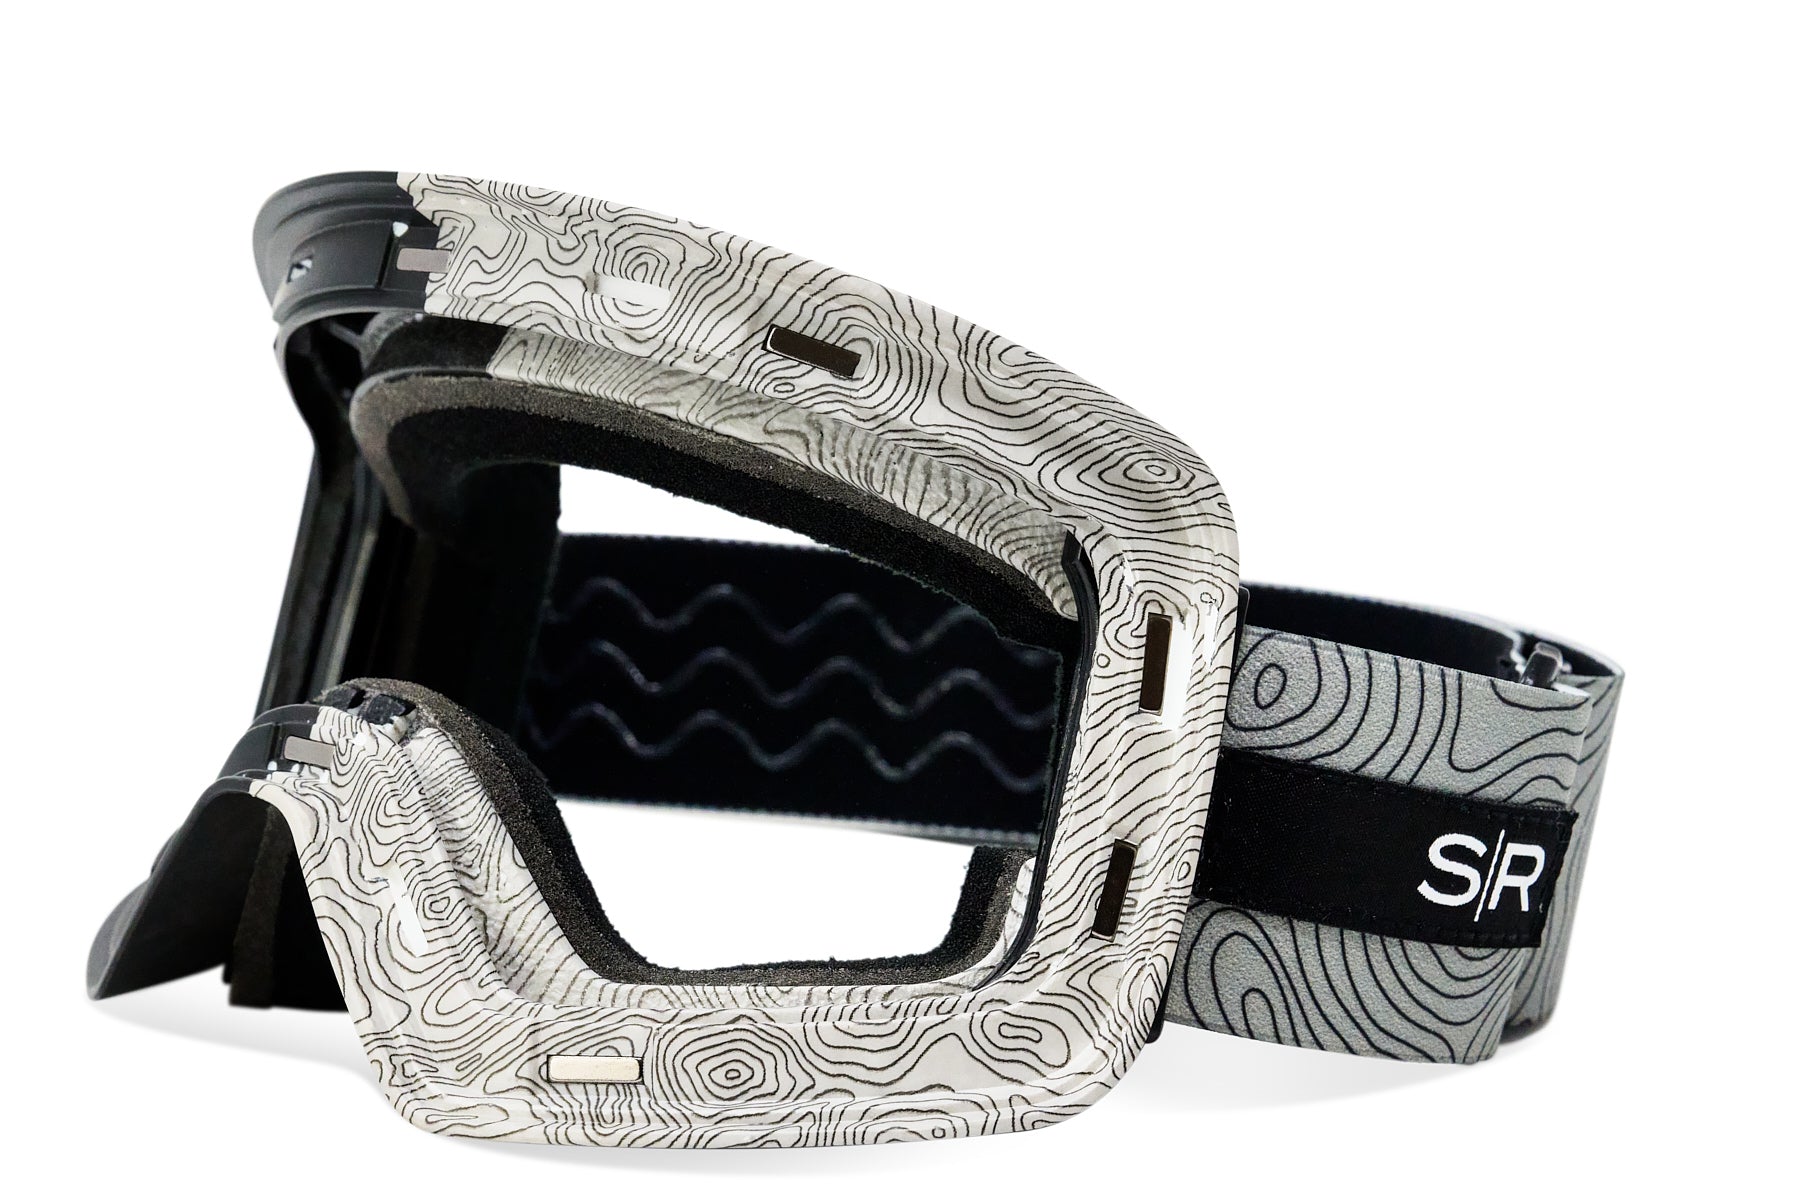 Frontier Snow Goggle - Stealth Terrain Magnetic Frame + Strap (Lens Not Included)